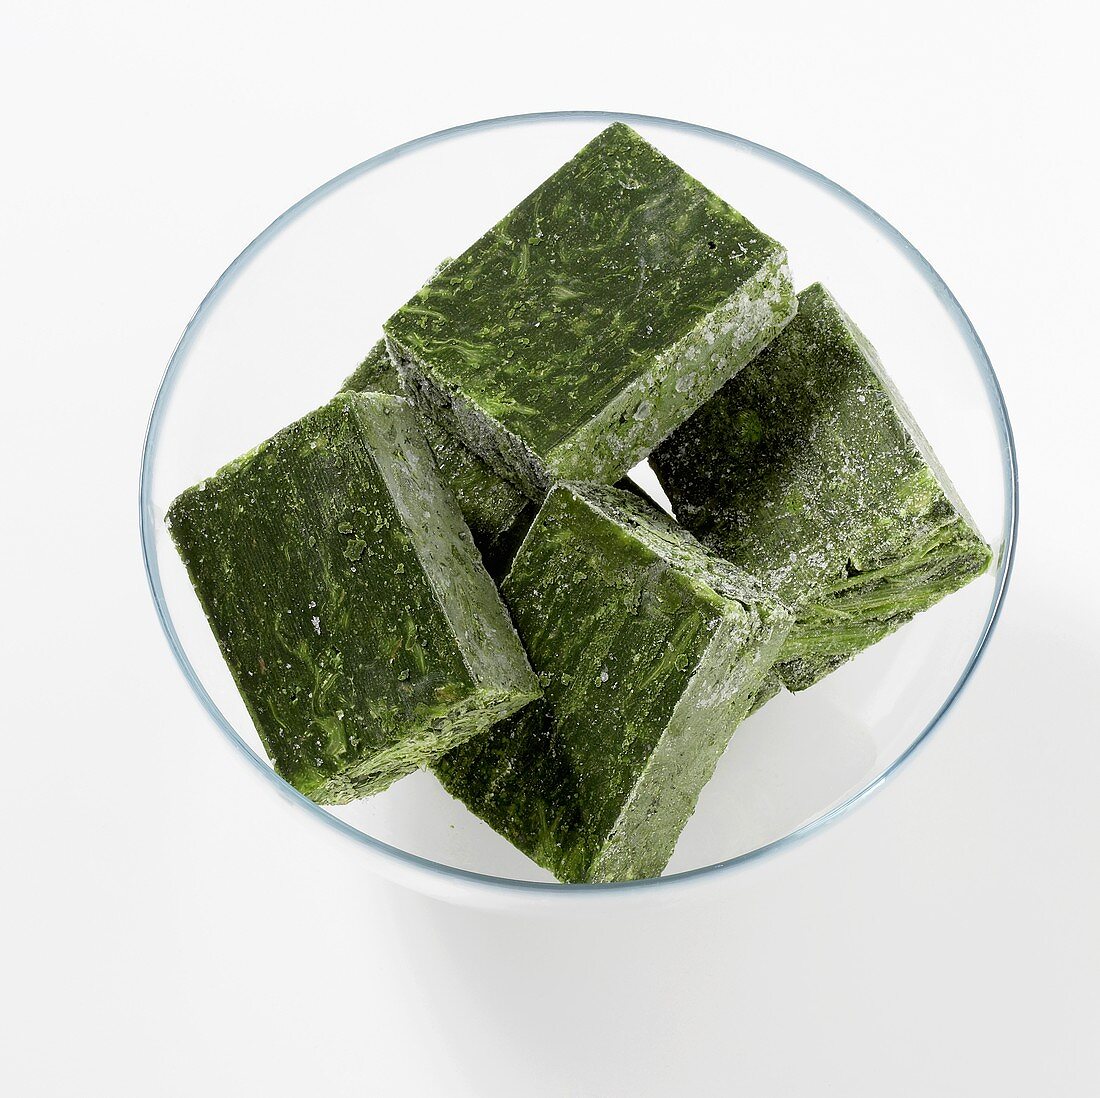 Cubes of frozen spinach in a glass bowl